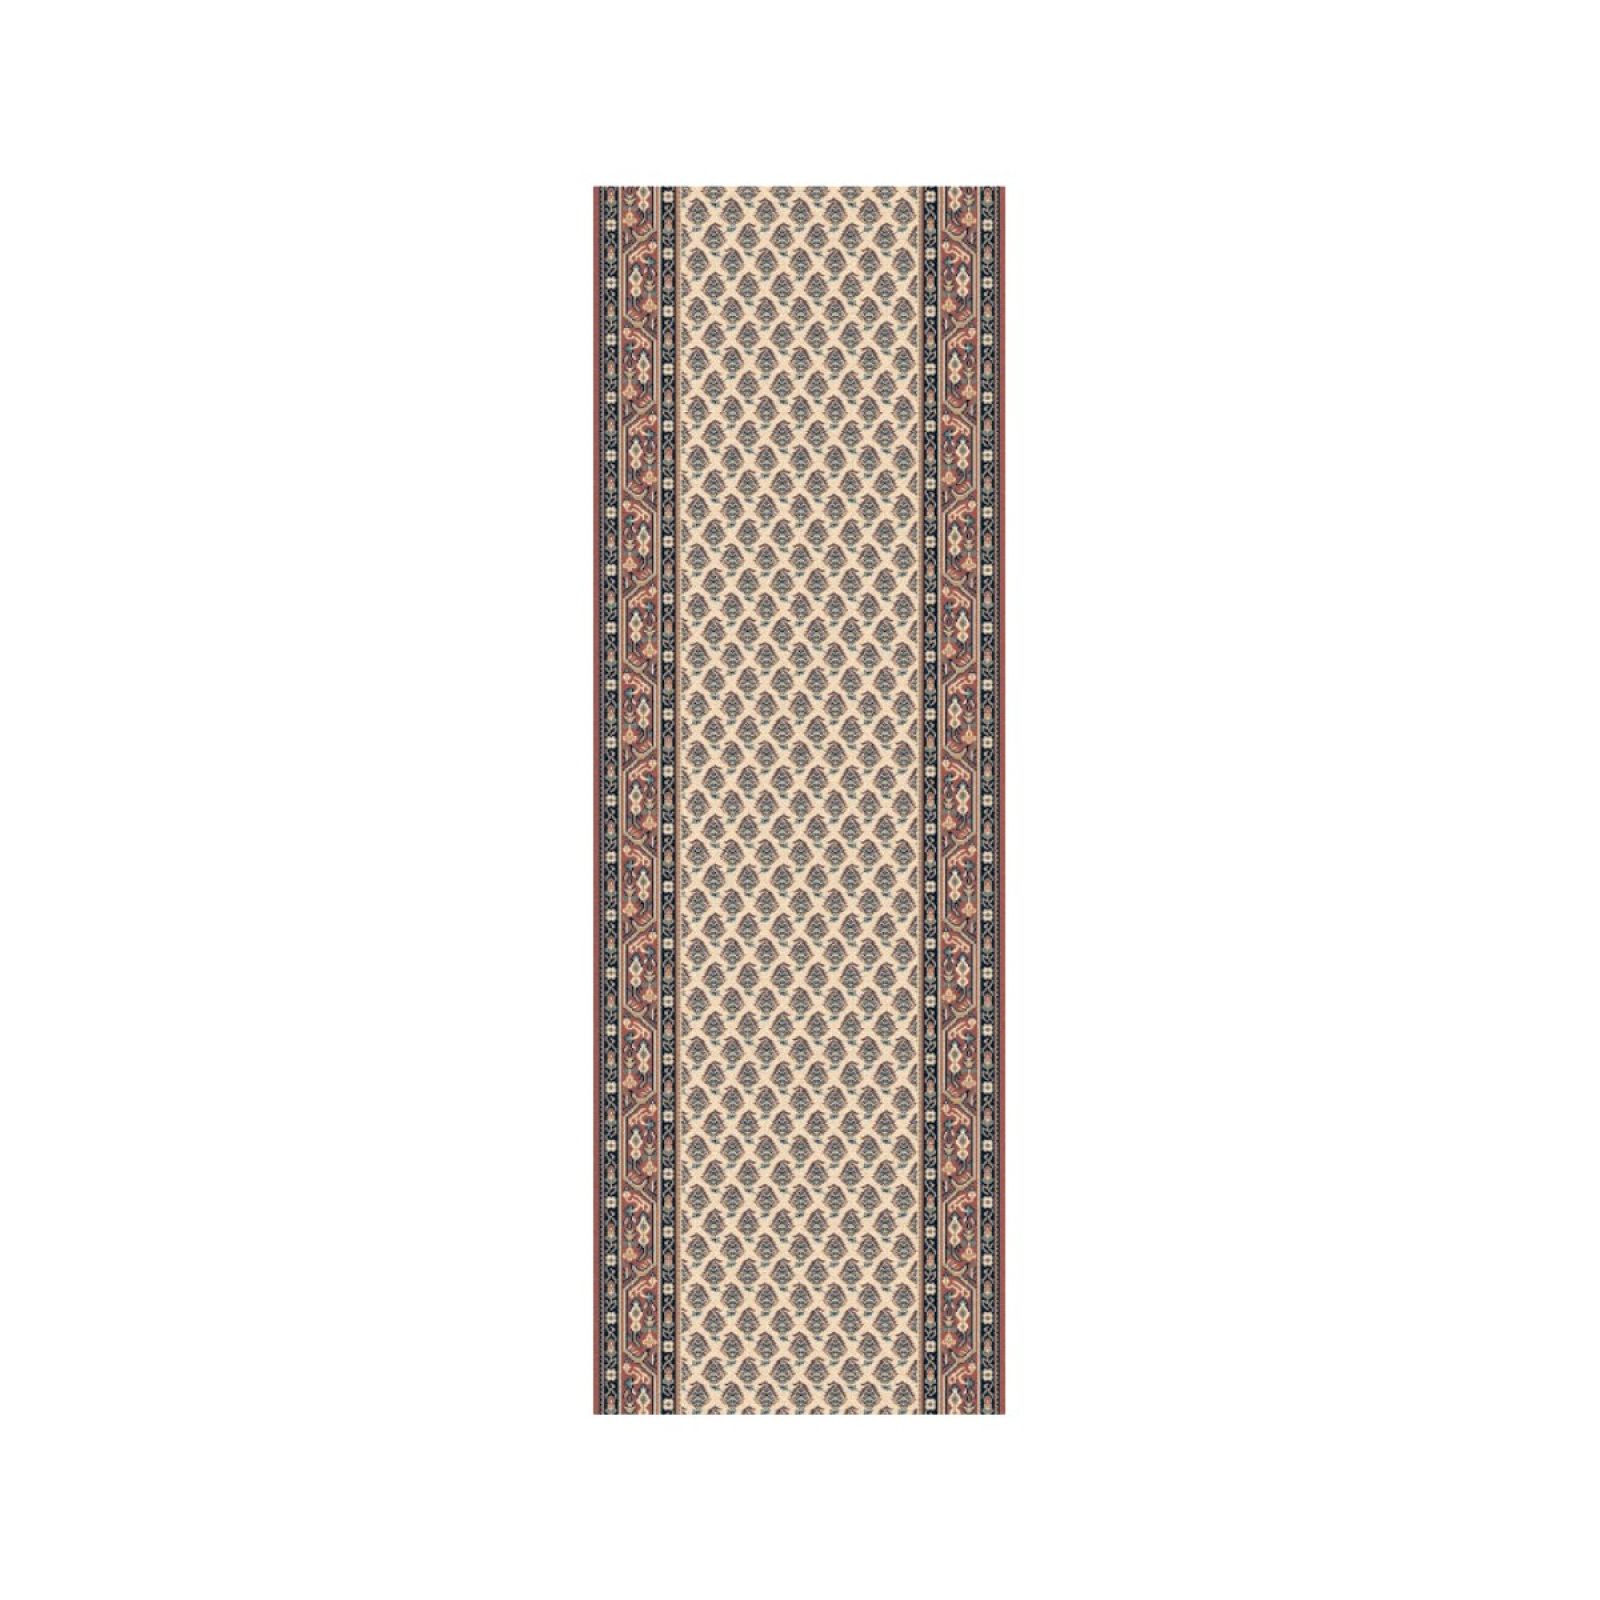 Victorian Stair Carpet Runner - style KA12248 in various colours